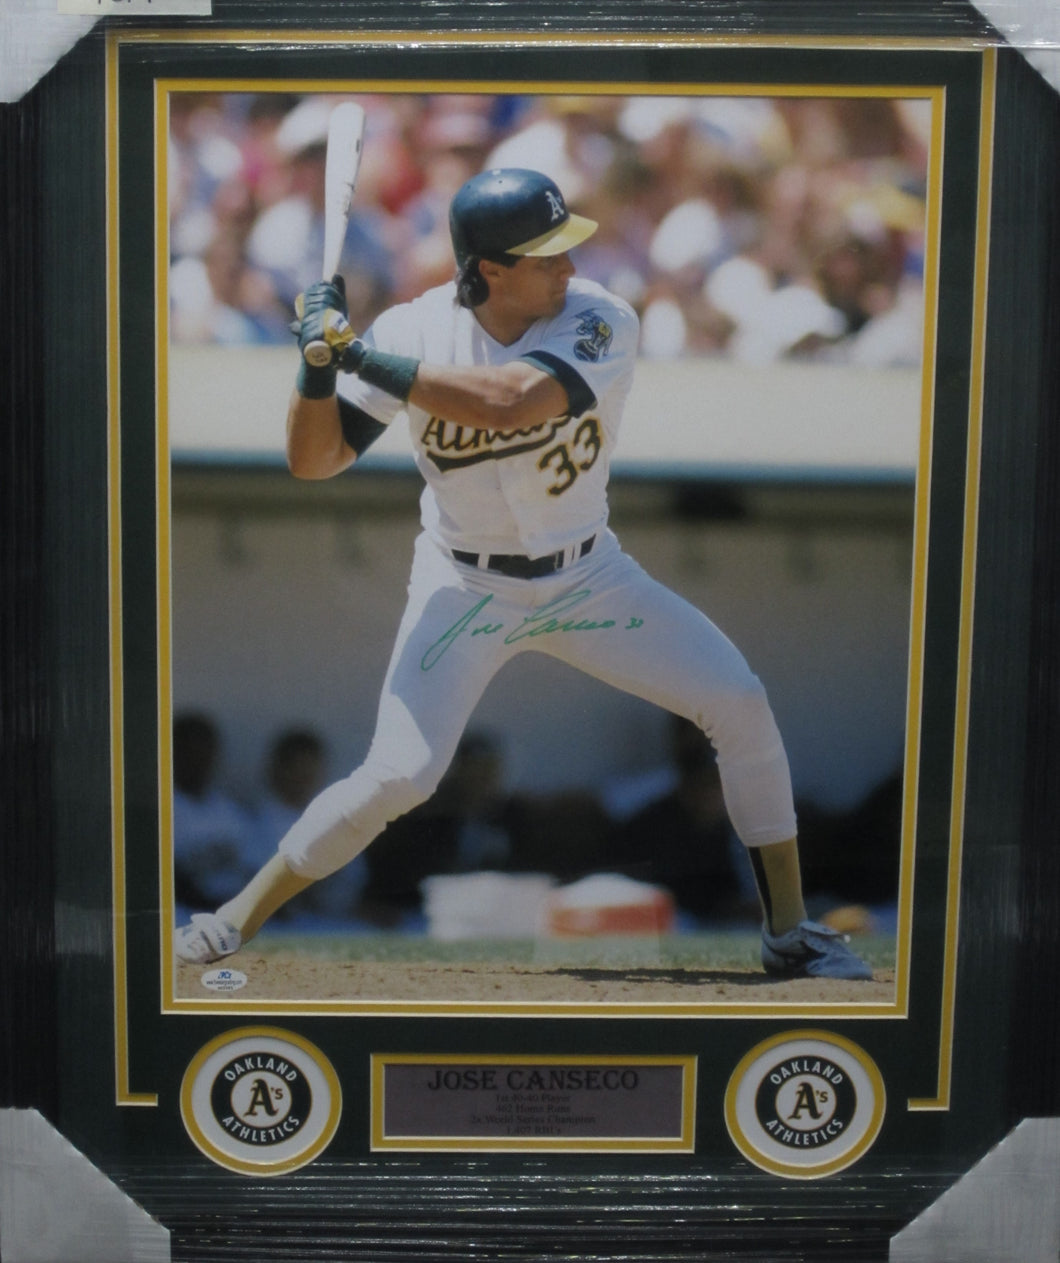 Oakland Athletics Jose Canseco Hand Signed Autographed 16x20 Photo Framed & Matted with COA